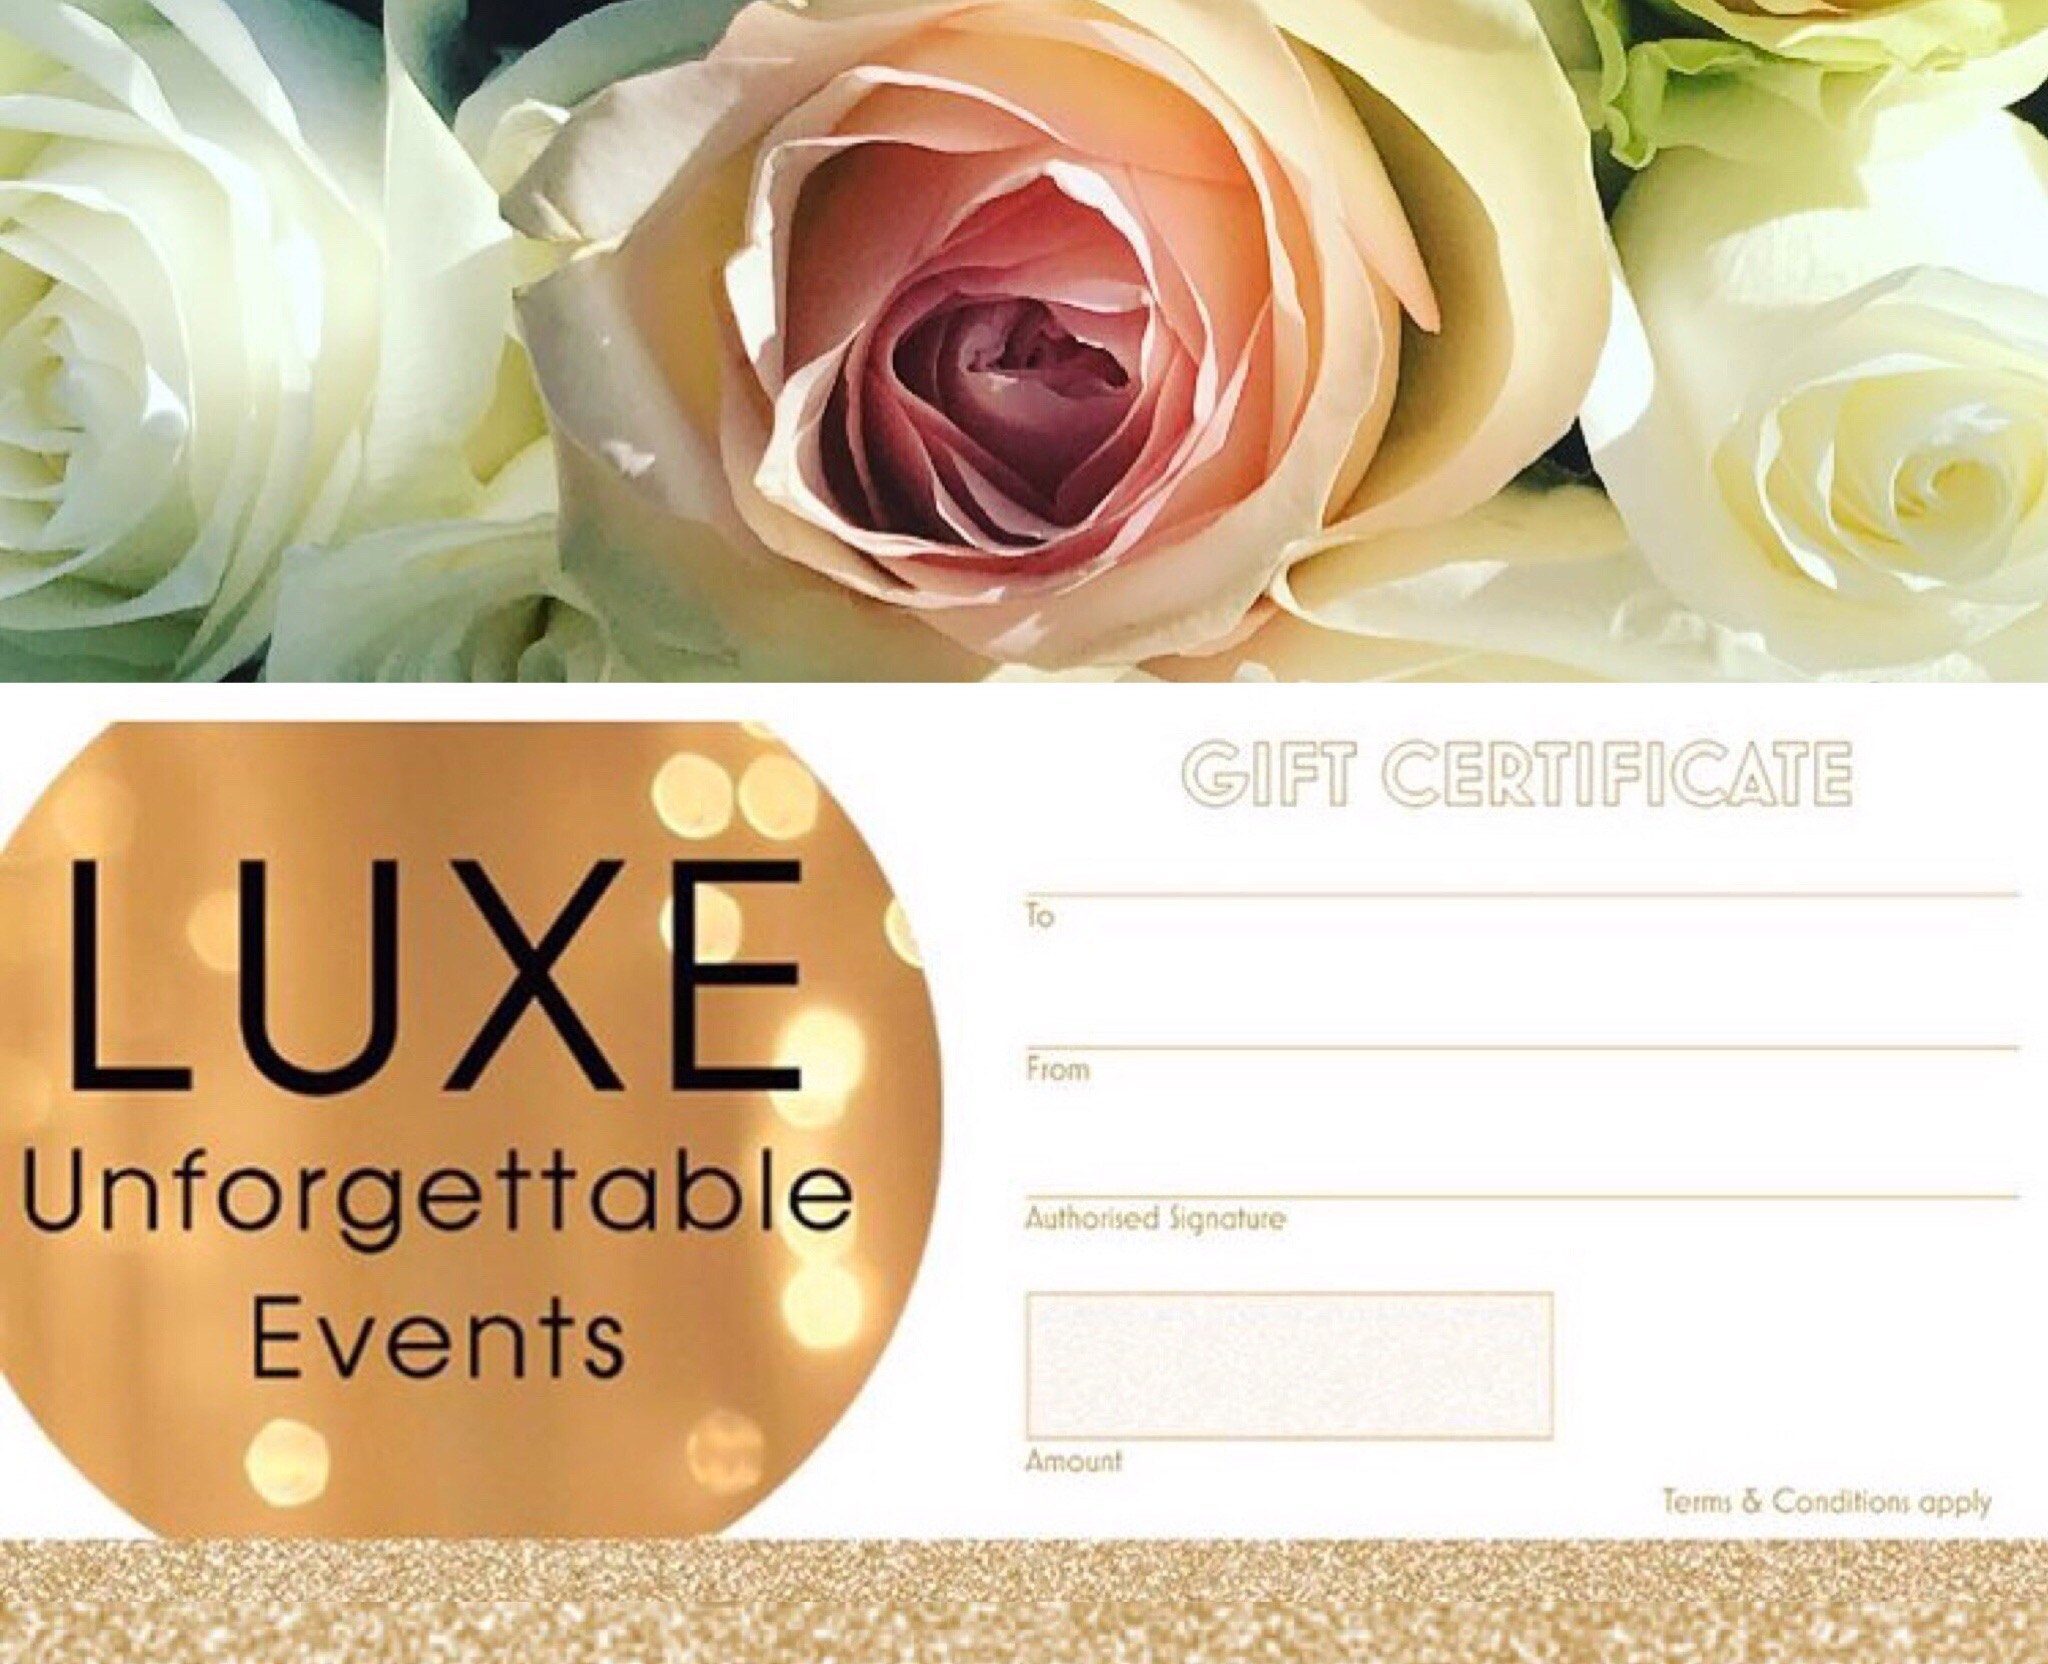 LUXE - Unforgettable Events gift certificates